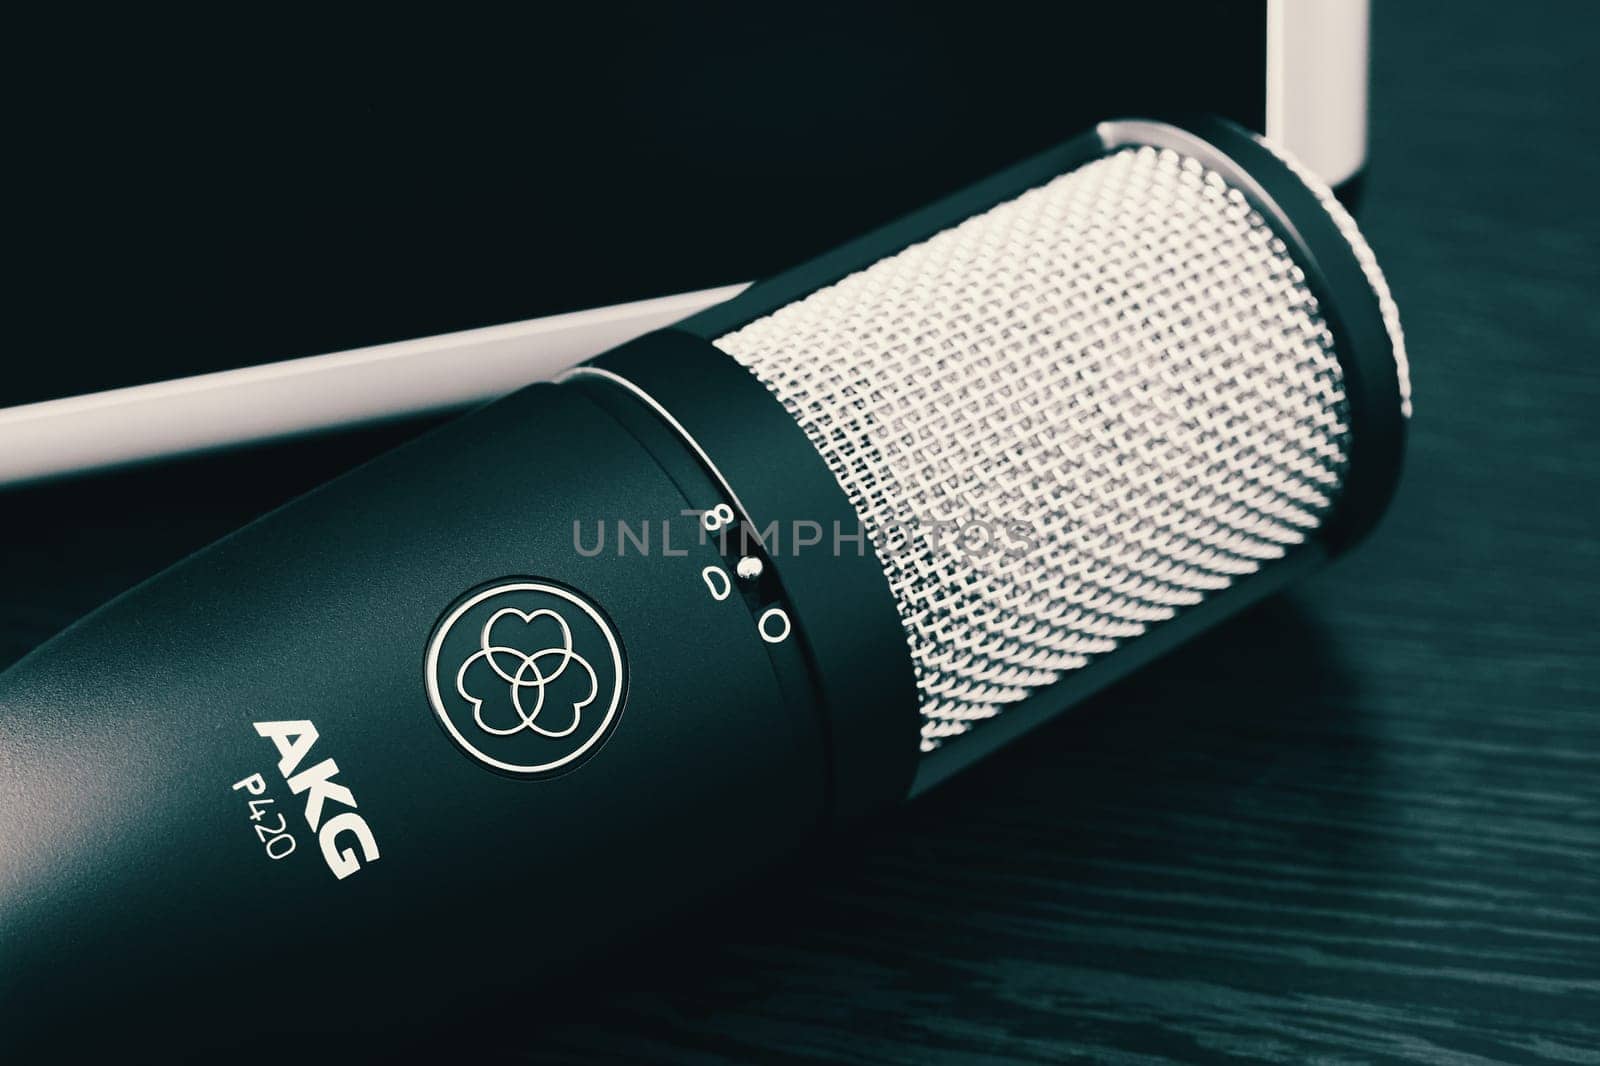 Ryazan, Russia - September 15, 2022: AKG condenser microphone close-up. AKG Acoustics is an acoustics engineering and manufacturing company